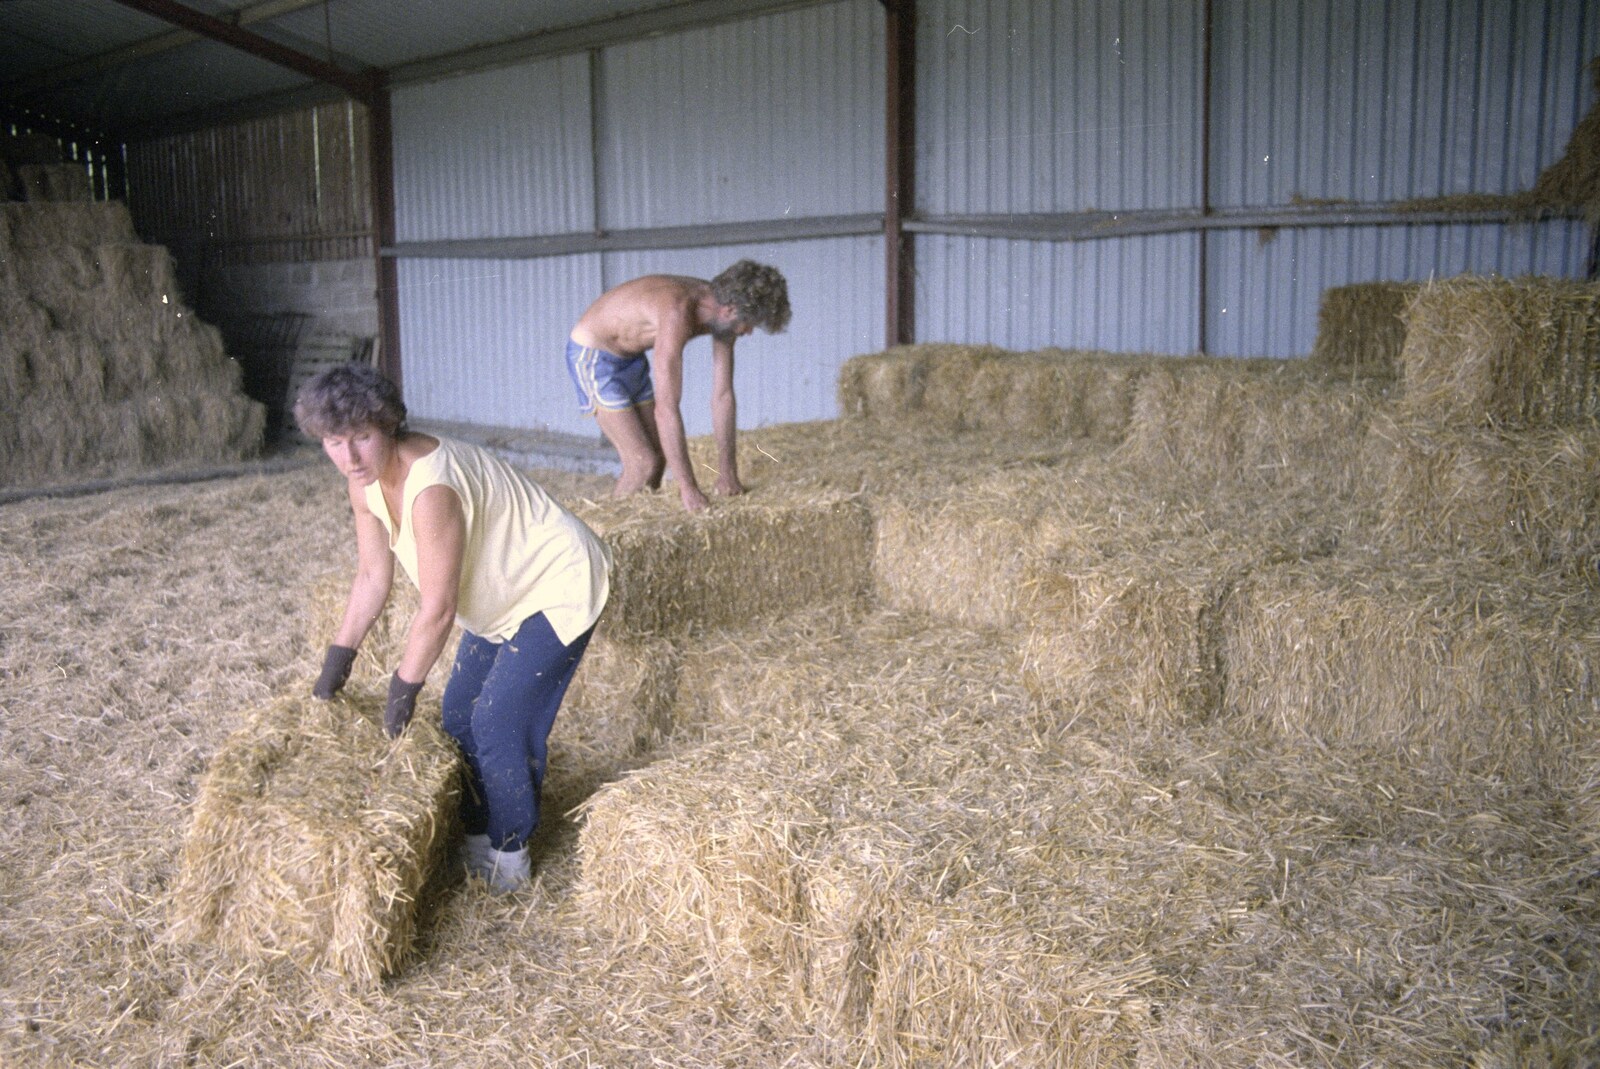 Working on the Harvest, Tibenham, Norfolk - 11th August 1992: Sue and Mike stack bales